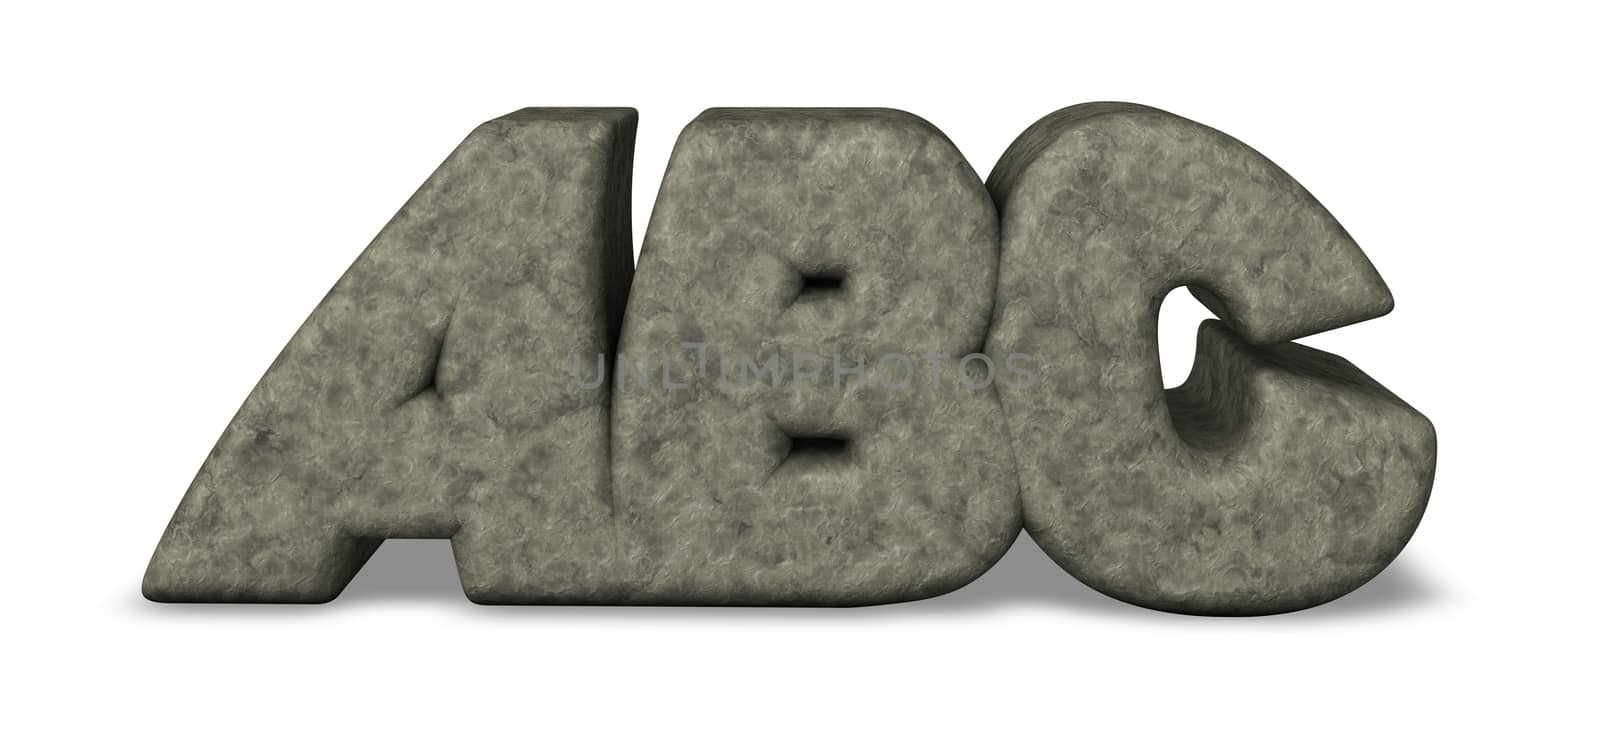 stone letters abc on white background - 3d illustration